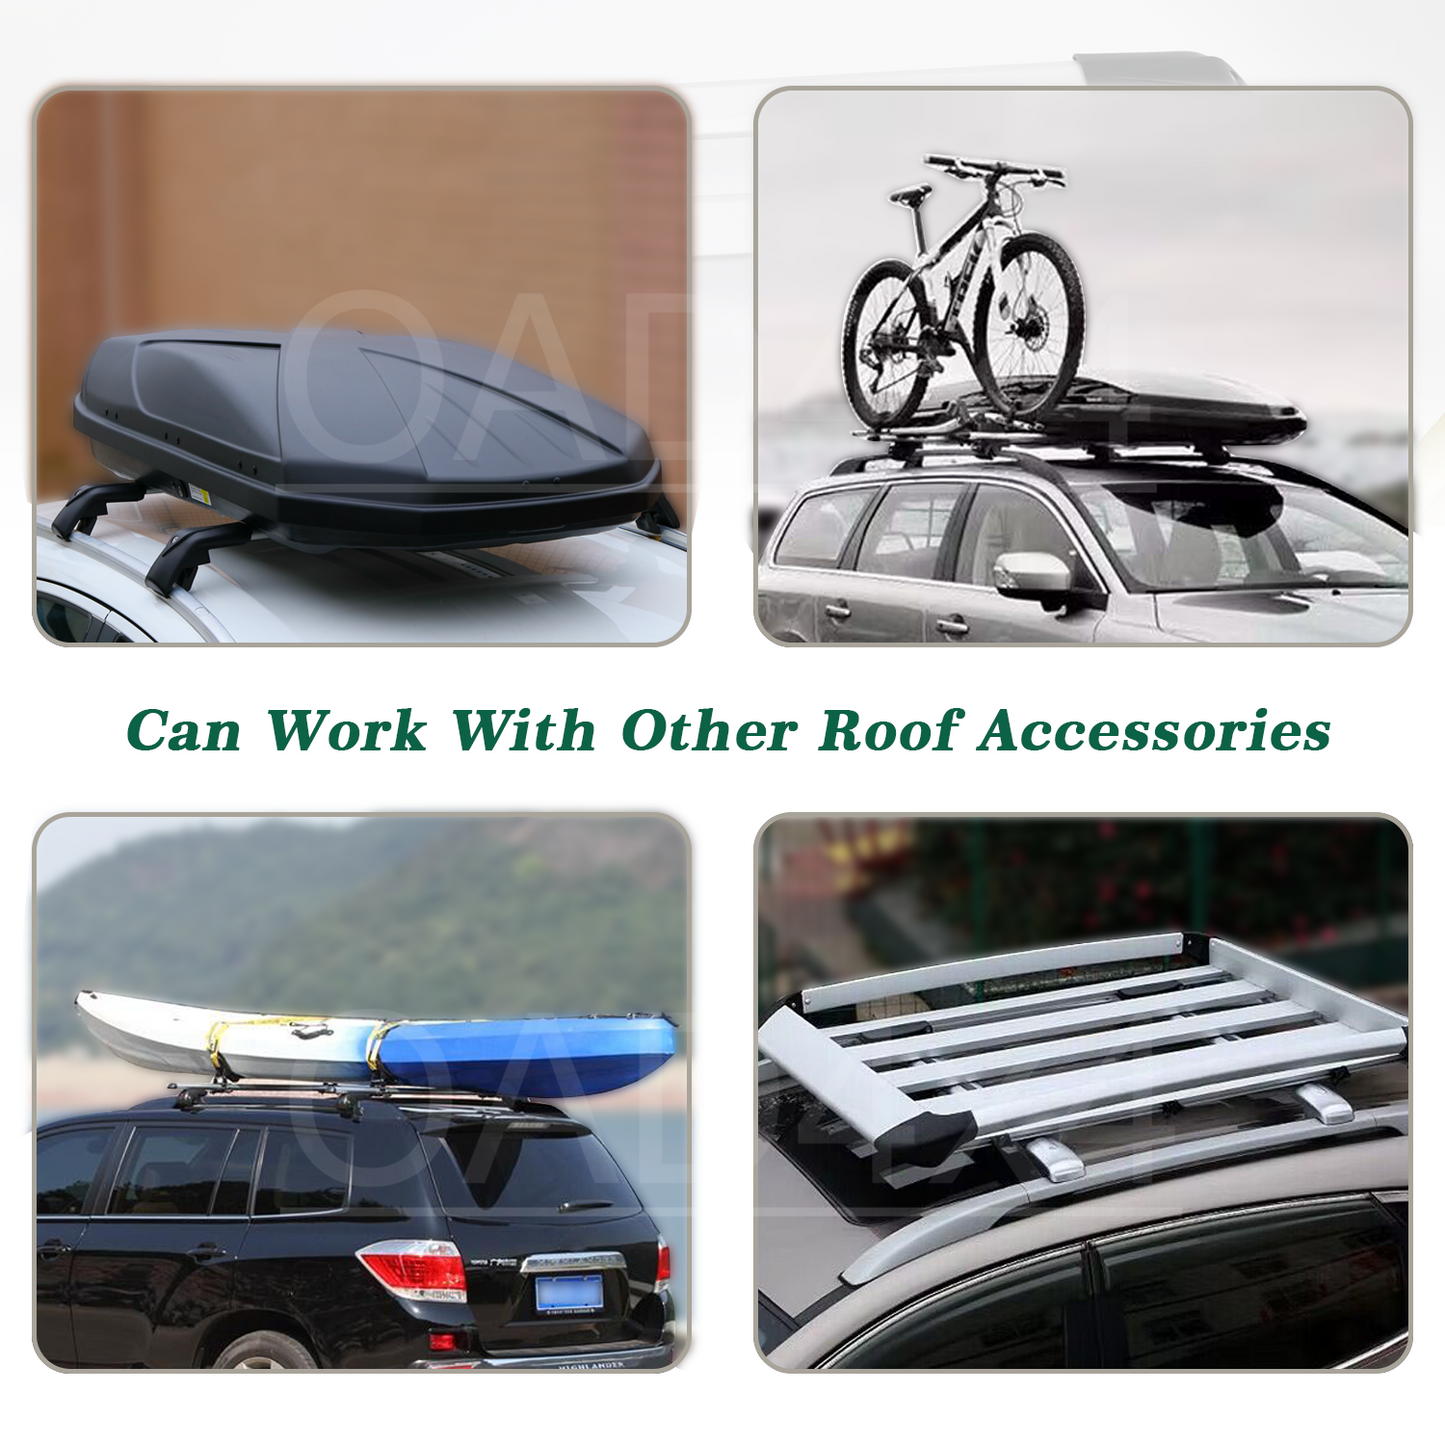 OAD 1 pair Aluminum Silver Cross Bar Roof Racks Baggage holder for Nissan Pathfinder R52 14-21 with raised roof rail